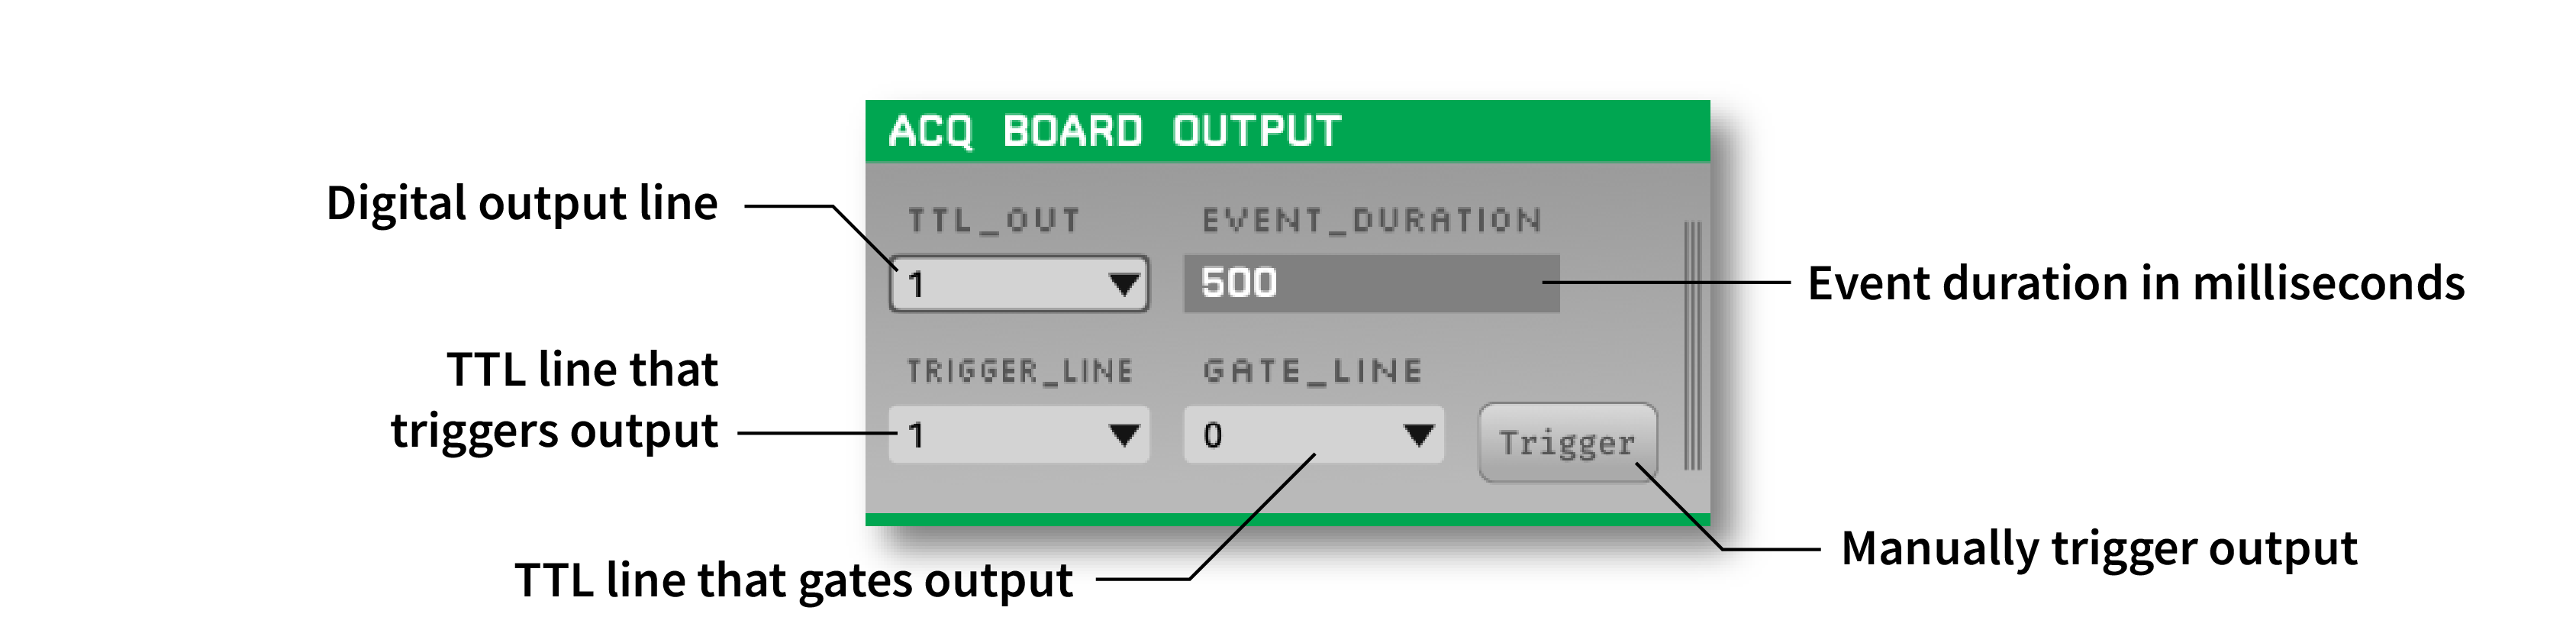 Annotated settings interface for the Acq Board Output plugin